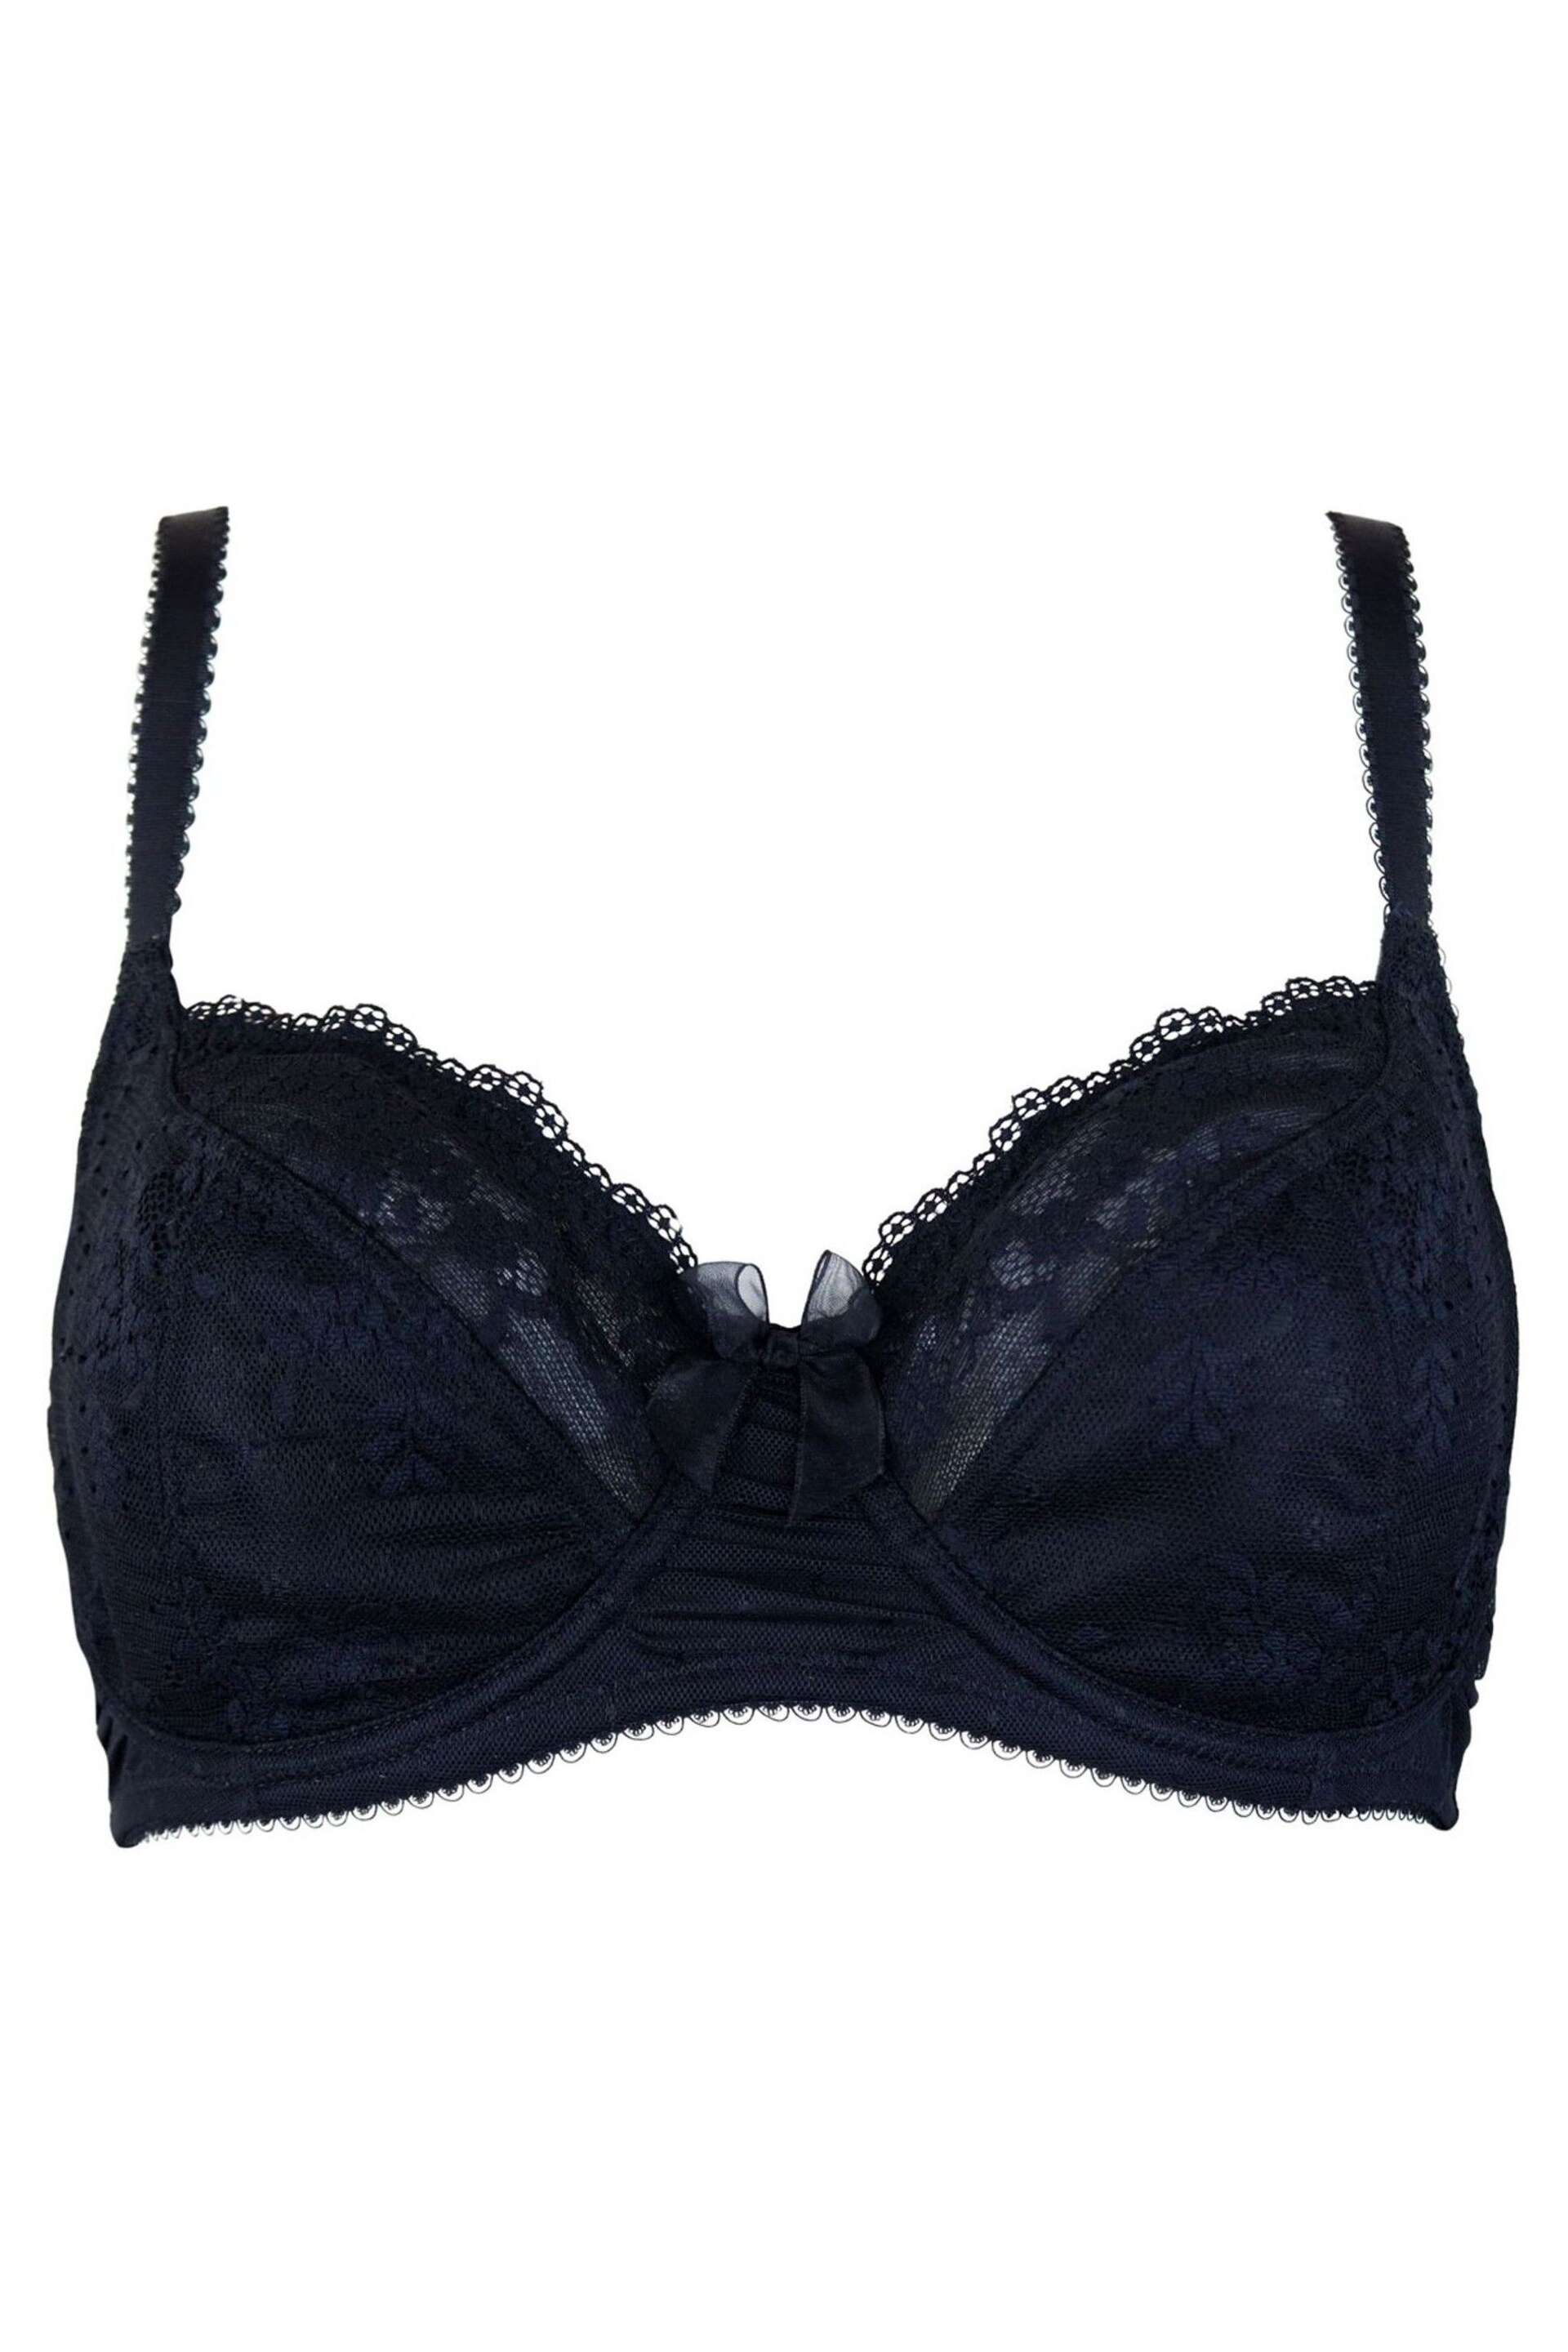 Pour Moi Black Flora Underwired Bra - Image 4 of 5